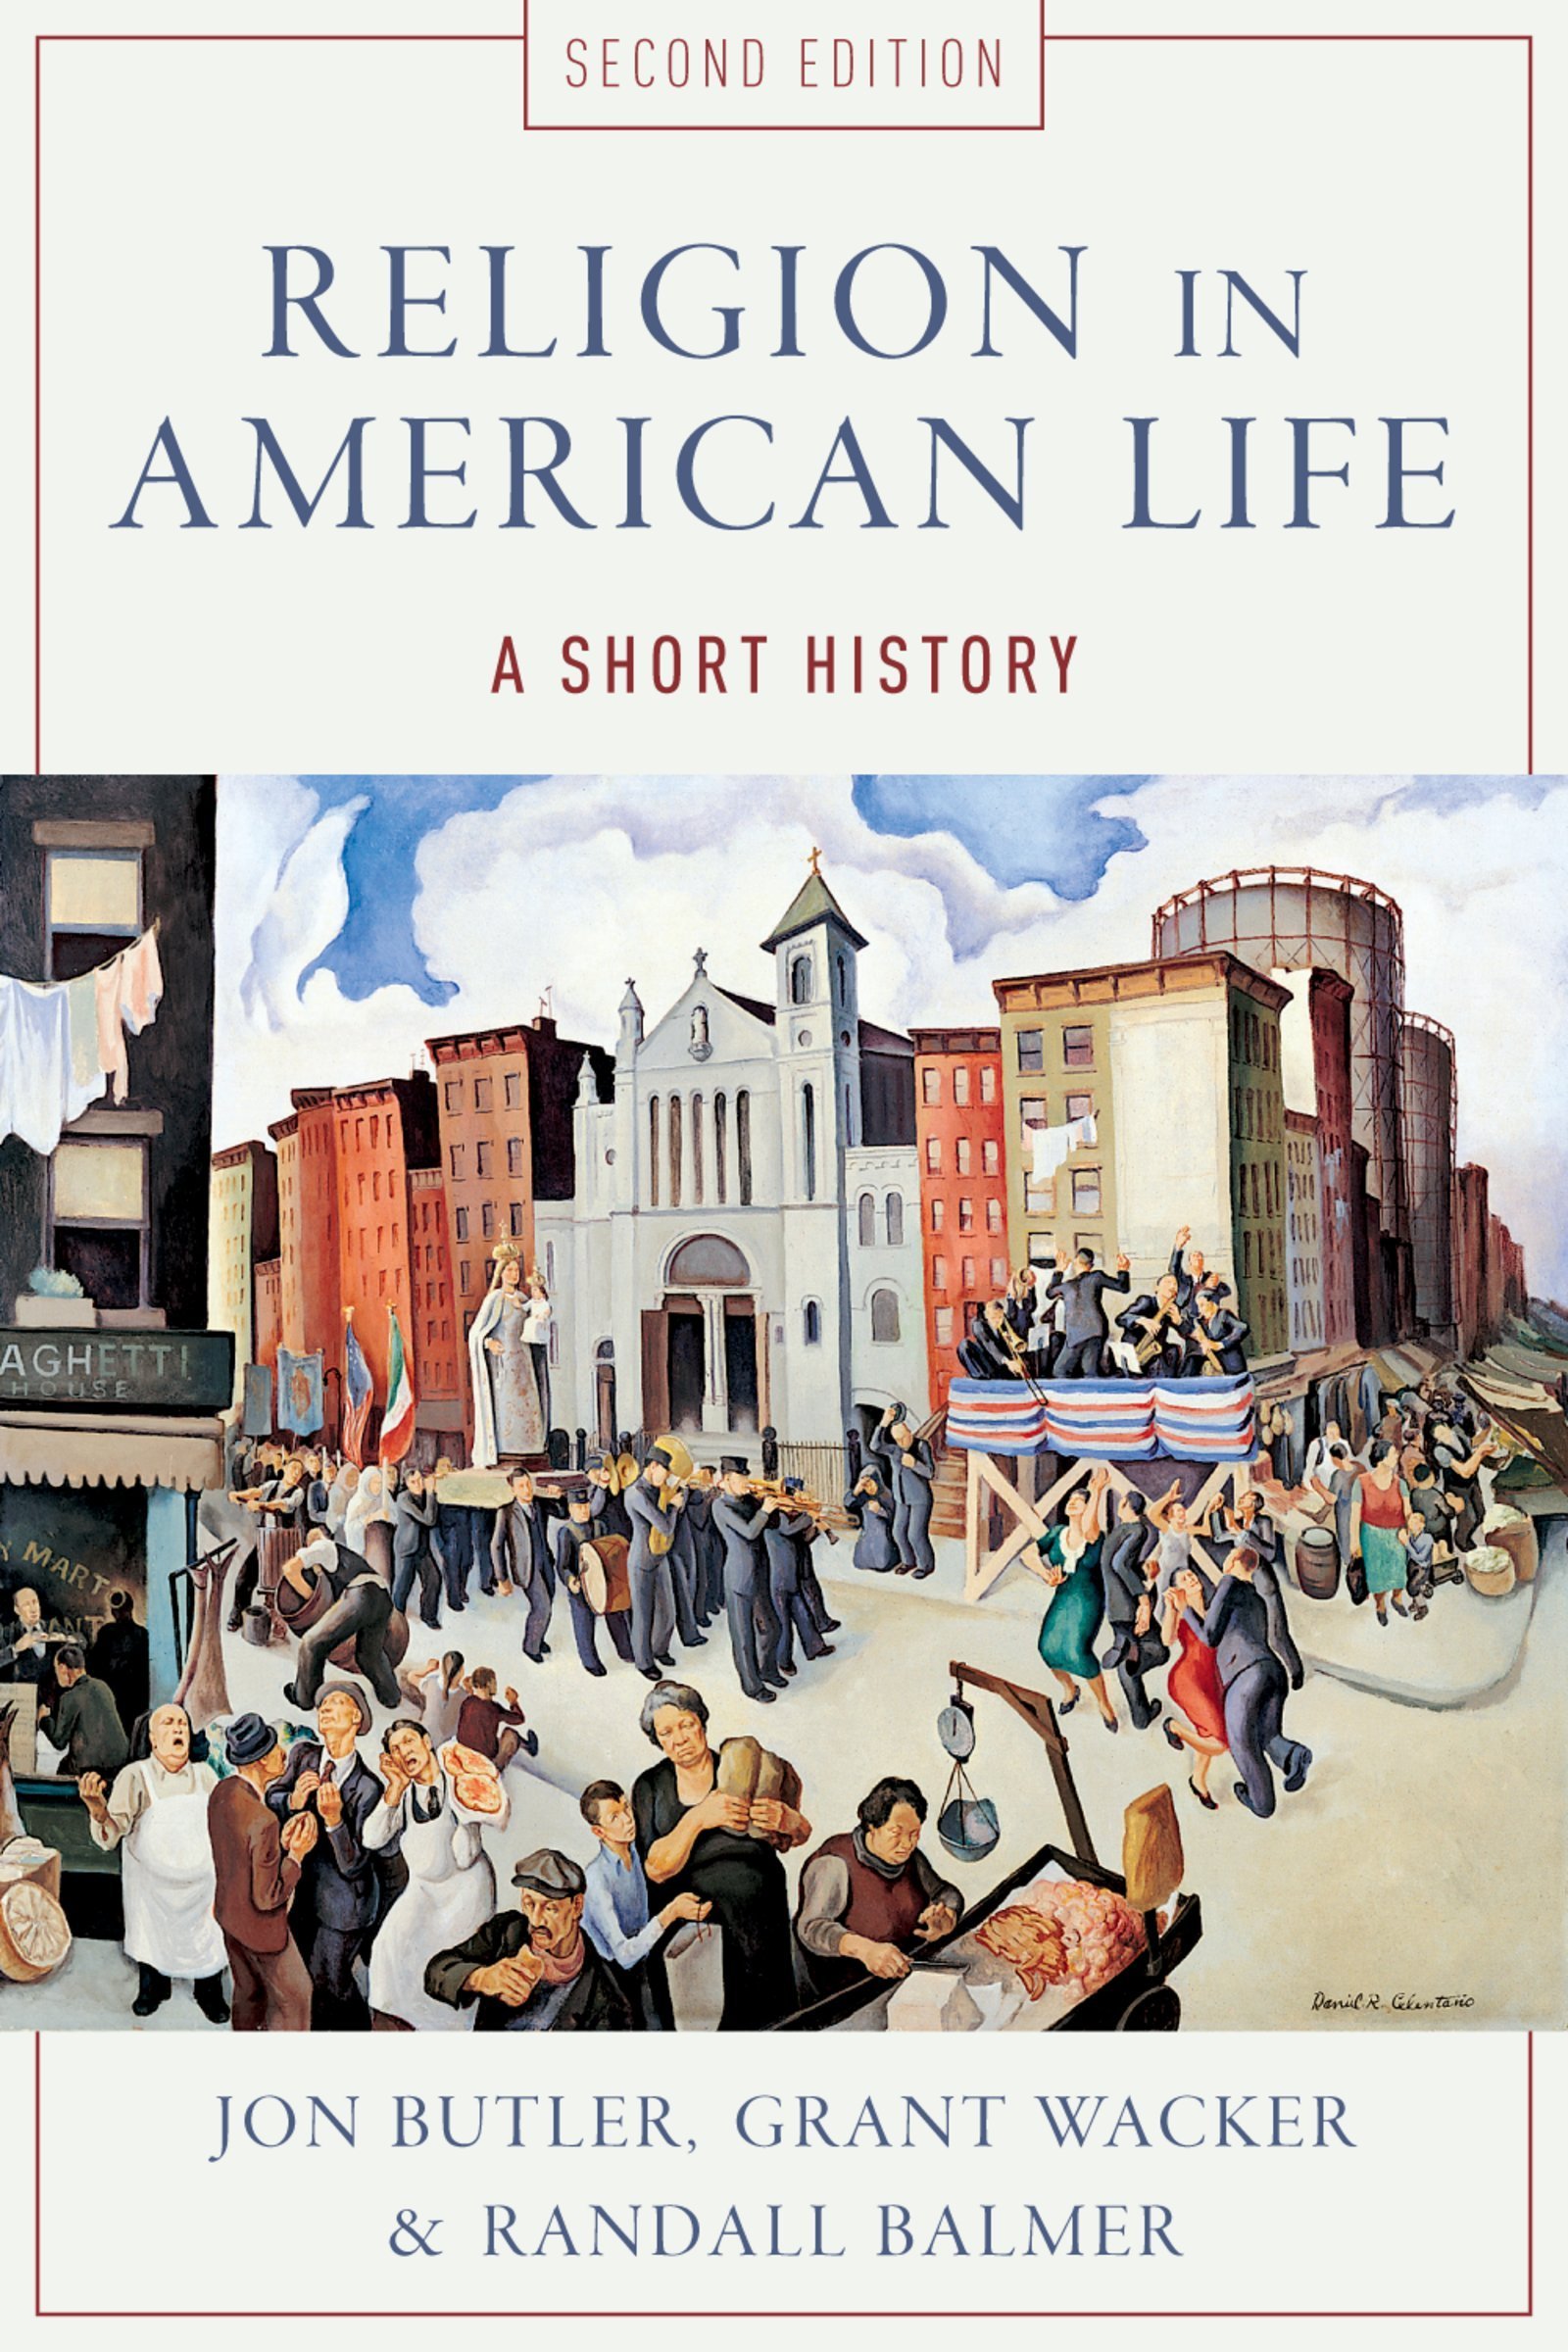 Religion in American Life- A Short History.jpeg